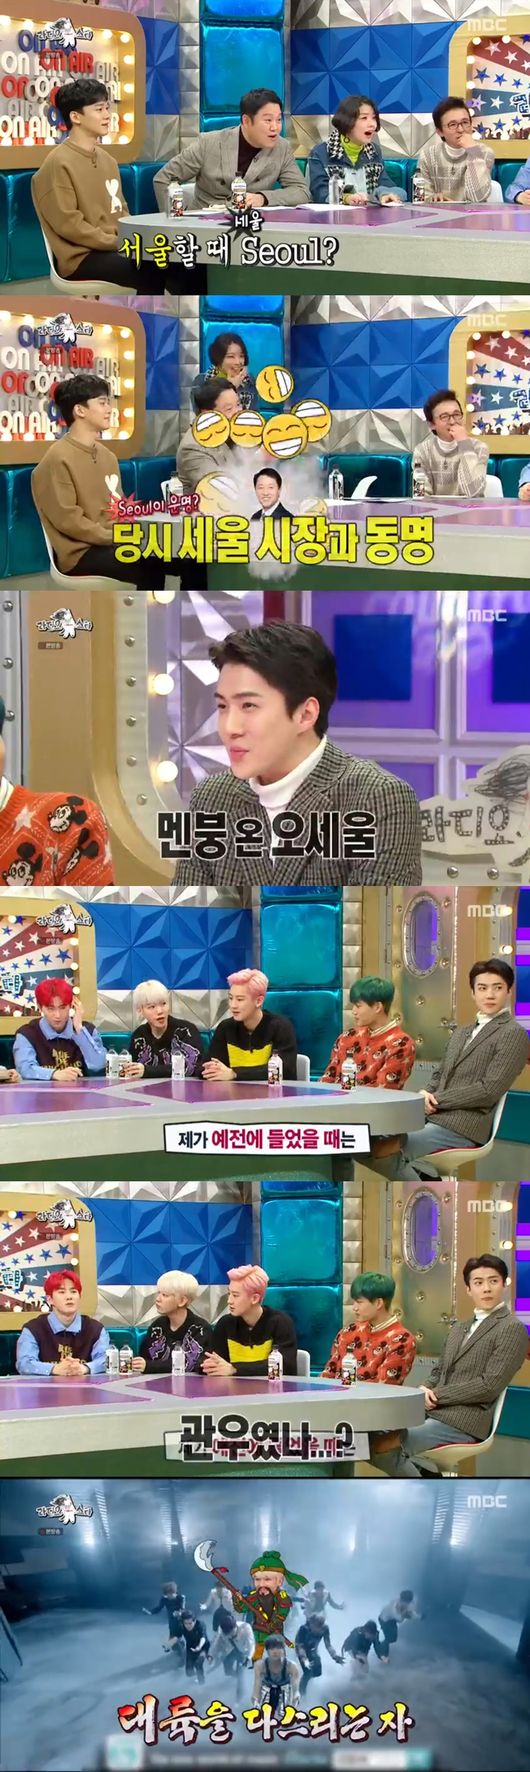 Sehun of the group EXO caught the eye by revealing that his name was to be set.In MBC Radio Star broadcasted on the last 4 days, EXO members appeared as a special feature of EXO Radio Star.I wanted to be a group in textbooks, and I had a HOT in the textbooks I saw, but now Im in the textbooks, said Baekhyun.When you go to the government office, there is a name for Baekhyun, Chen said.I am from Bucheon, and when I go to a government office in Bucheon, I have a name for the example, said Baekhyun.I had one superpower at my debut, Kai said, referring to his debut. It was a repertoire to show. But we could not show it.But after five years, I naturally understood it. Sehun confessed that he wanted to avoid Lee Soo-mans choice: When the name of guardian first came out, the members laughed, not even the guardian angel, and what was it?But he told me to set up a name. Baekhyun said, I also heard that the name was Guan Yu.Meanwhile, Chanyeol said: I was impressed by Dio recently, I was lonely when I was performing silent for a month because of my neck, but Kyungsu came home a lot.I just came and played my cell phone game. Kim Gulra said, I just went to rest. Chanyeol said, The light water often does the jujitsu, and one day the light water can not come out if I put a choke technique on me.So I asked him to try it once, and he put on a choke technique, and his consciousness was blurred. Chanyeol said, I can not tell you to stop because of self-esteem, and my consciousness became increasingly cloudy.At that time, the ankle of the light water turned and I could not walk for two months. Chanyeol is really competitive, and even playing basketball is so bad that he gets hurt, Sehun said, so Chanyeol said, Thats an old story.I have been saving my body through silent practice. I still play basketball these days, but I choose a position where I do not get hurt. Mr. Lee Soo-man likes to be a gag, Kai said.Baekhyun said, My title song was United Nations Village, and Lee Soo-man told me to go to United Nations Village and live.Kai laughed, saying, I honestly do not like it, so I do not read it at all.MBC Radio Star broadcast capture